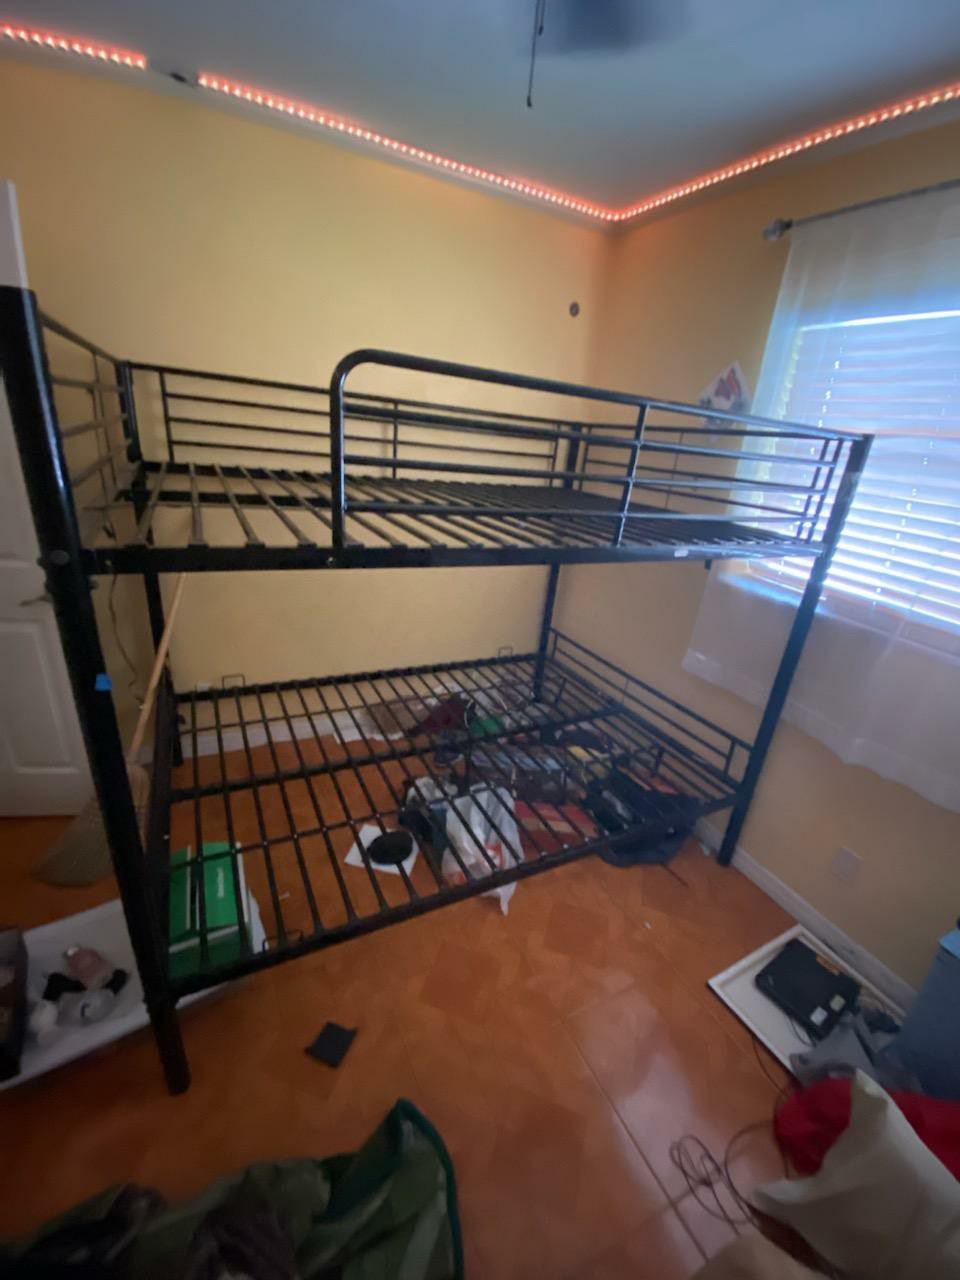 Bunk bed Full size